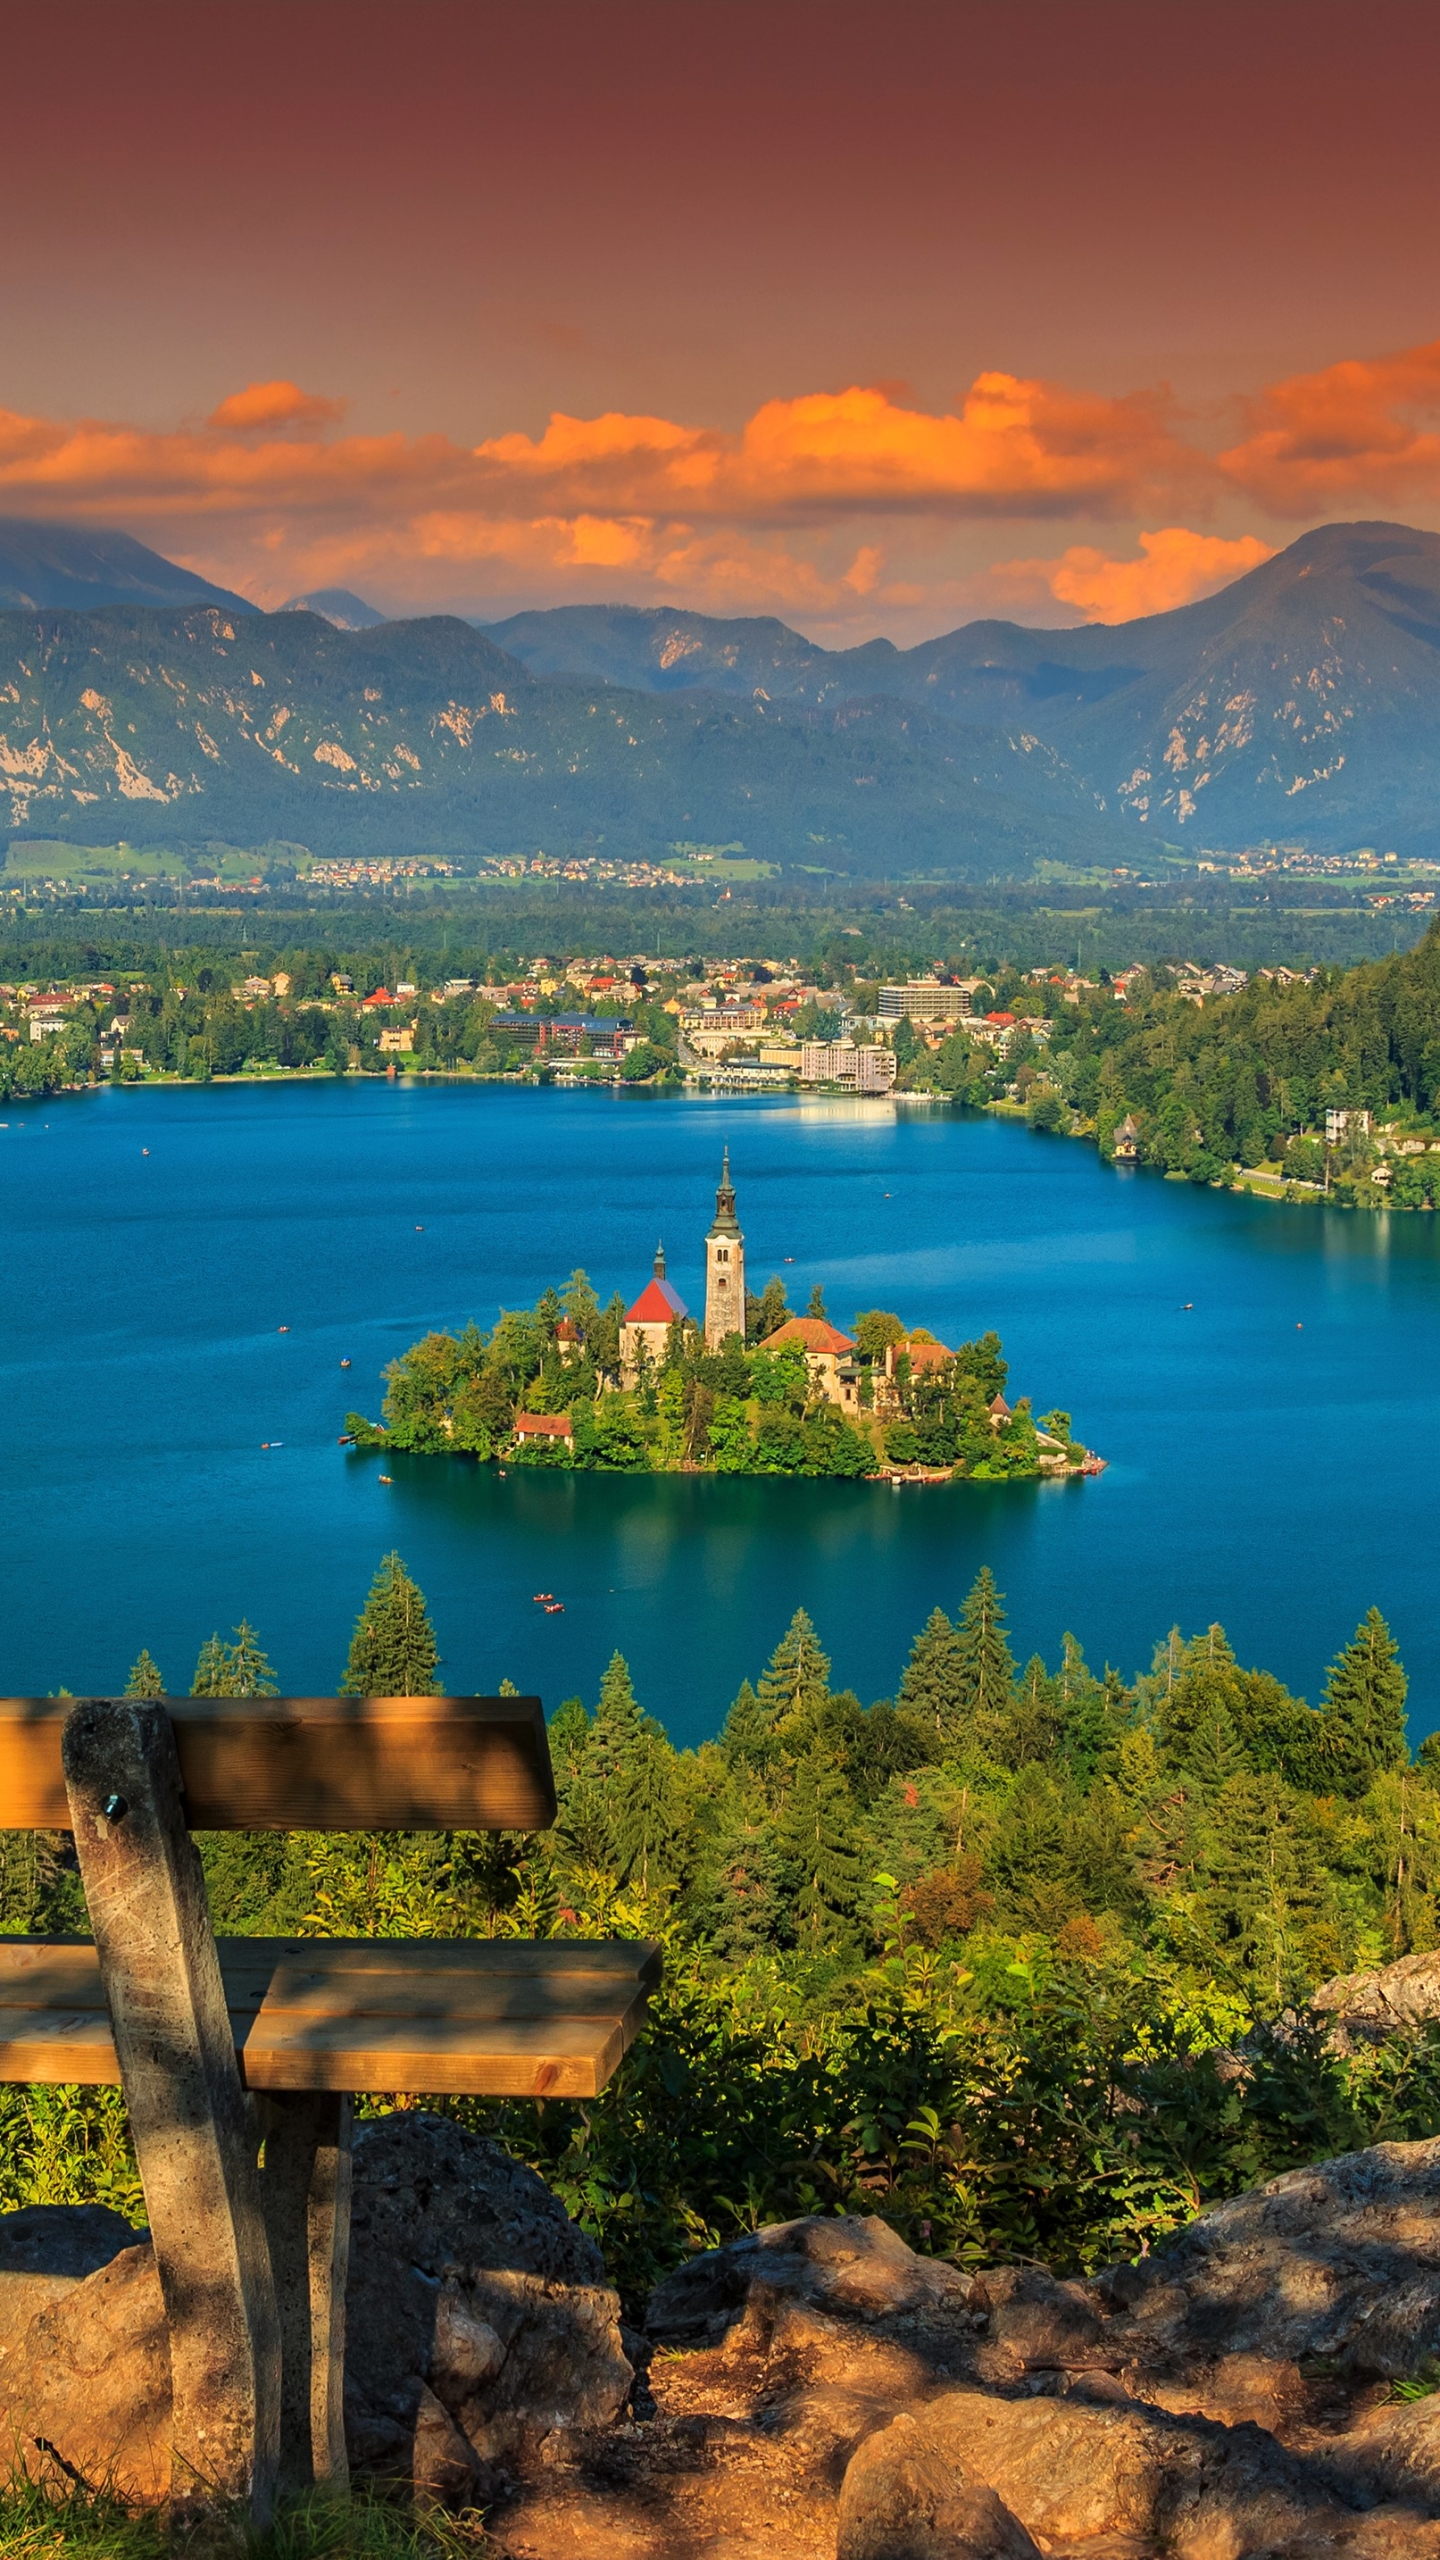 religious, assumption of mary church, bench, lake bled, earth, island, lake, churches